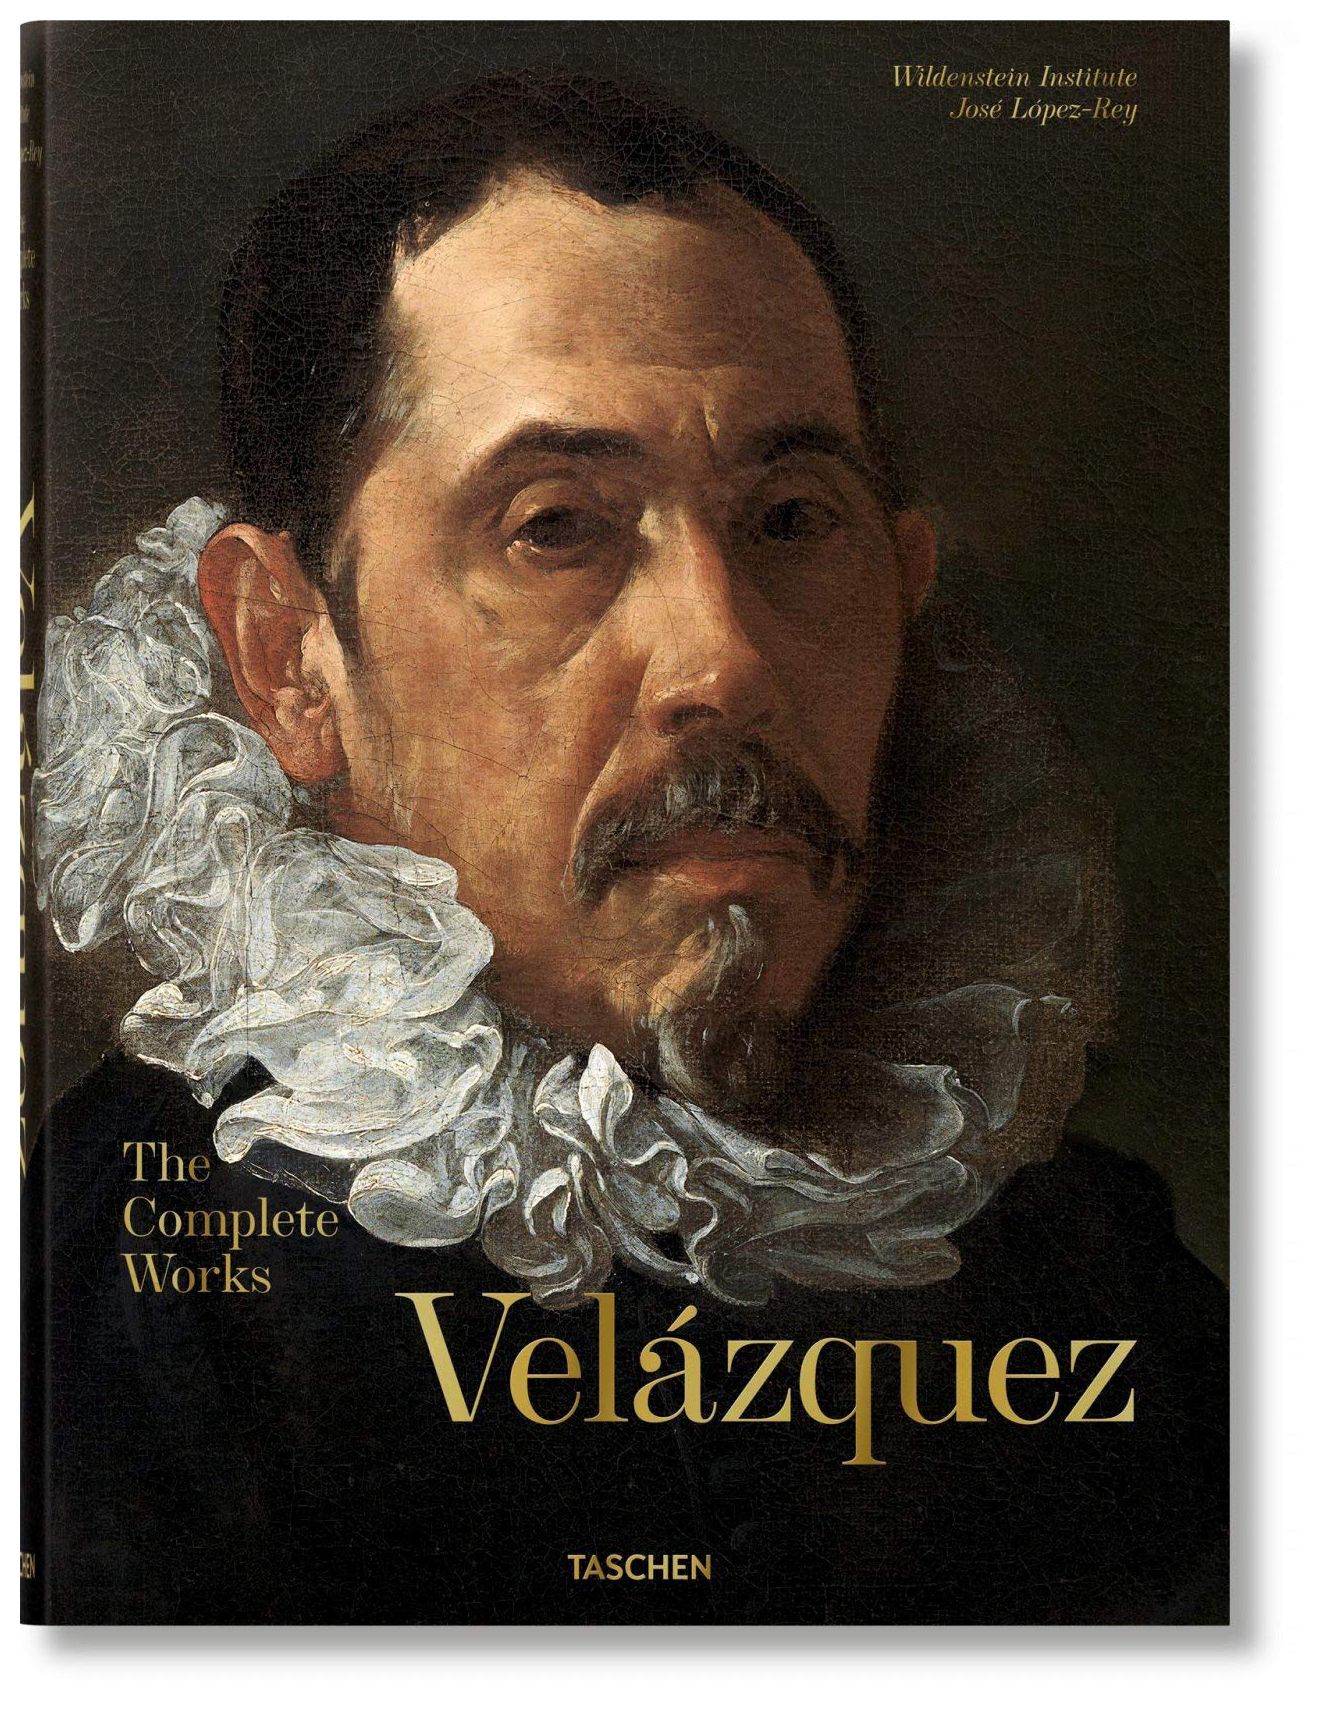 Velazquez. The Complete Works zaha hadid complete works 1979 today